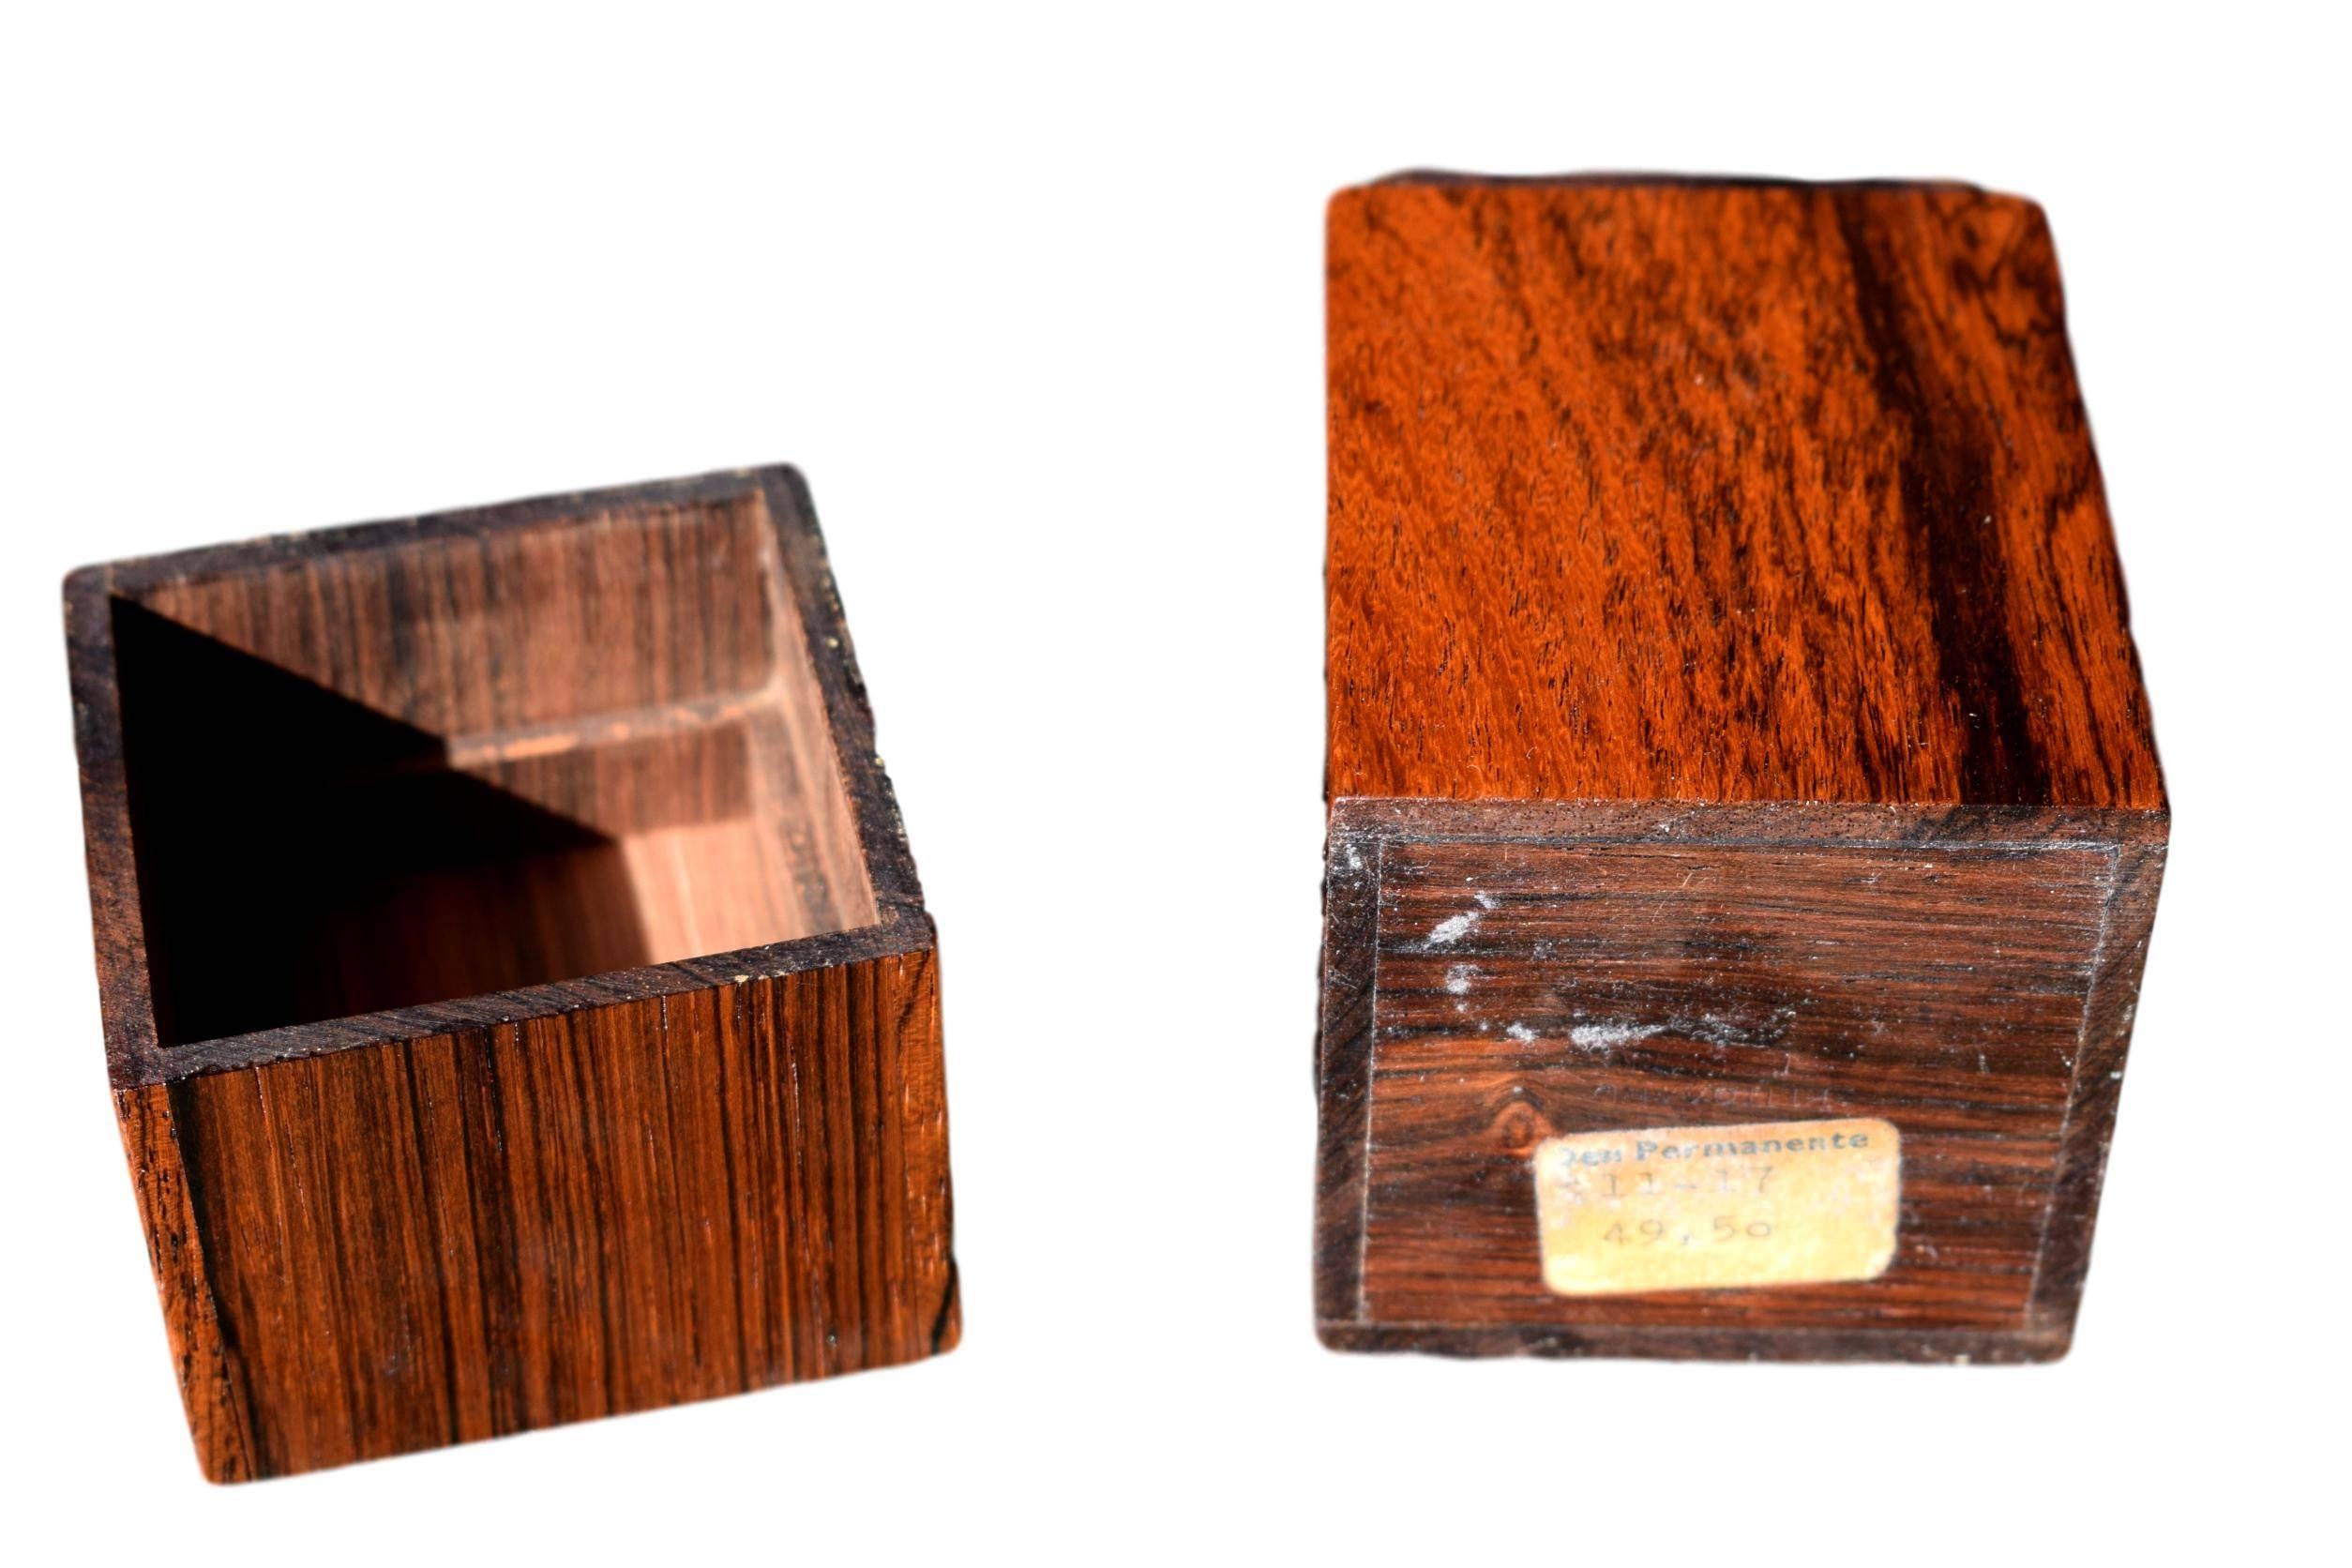 Danish Midcentury Rosewood Box by Alfred Klitgaard with Enamel by Bodil Eje In Good Condition For Sale In Denmark, DK